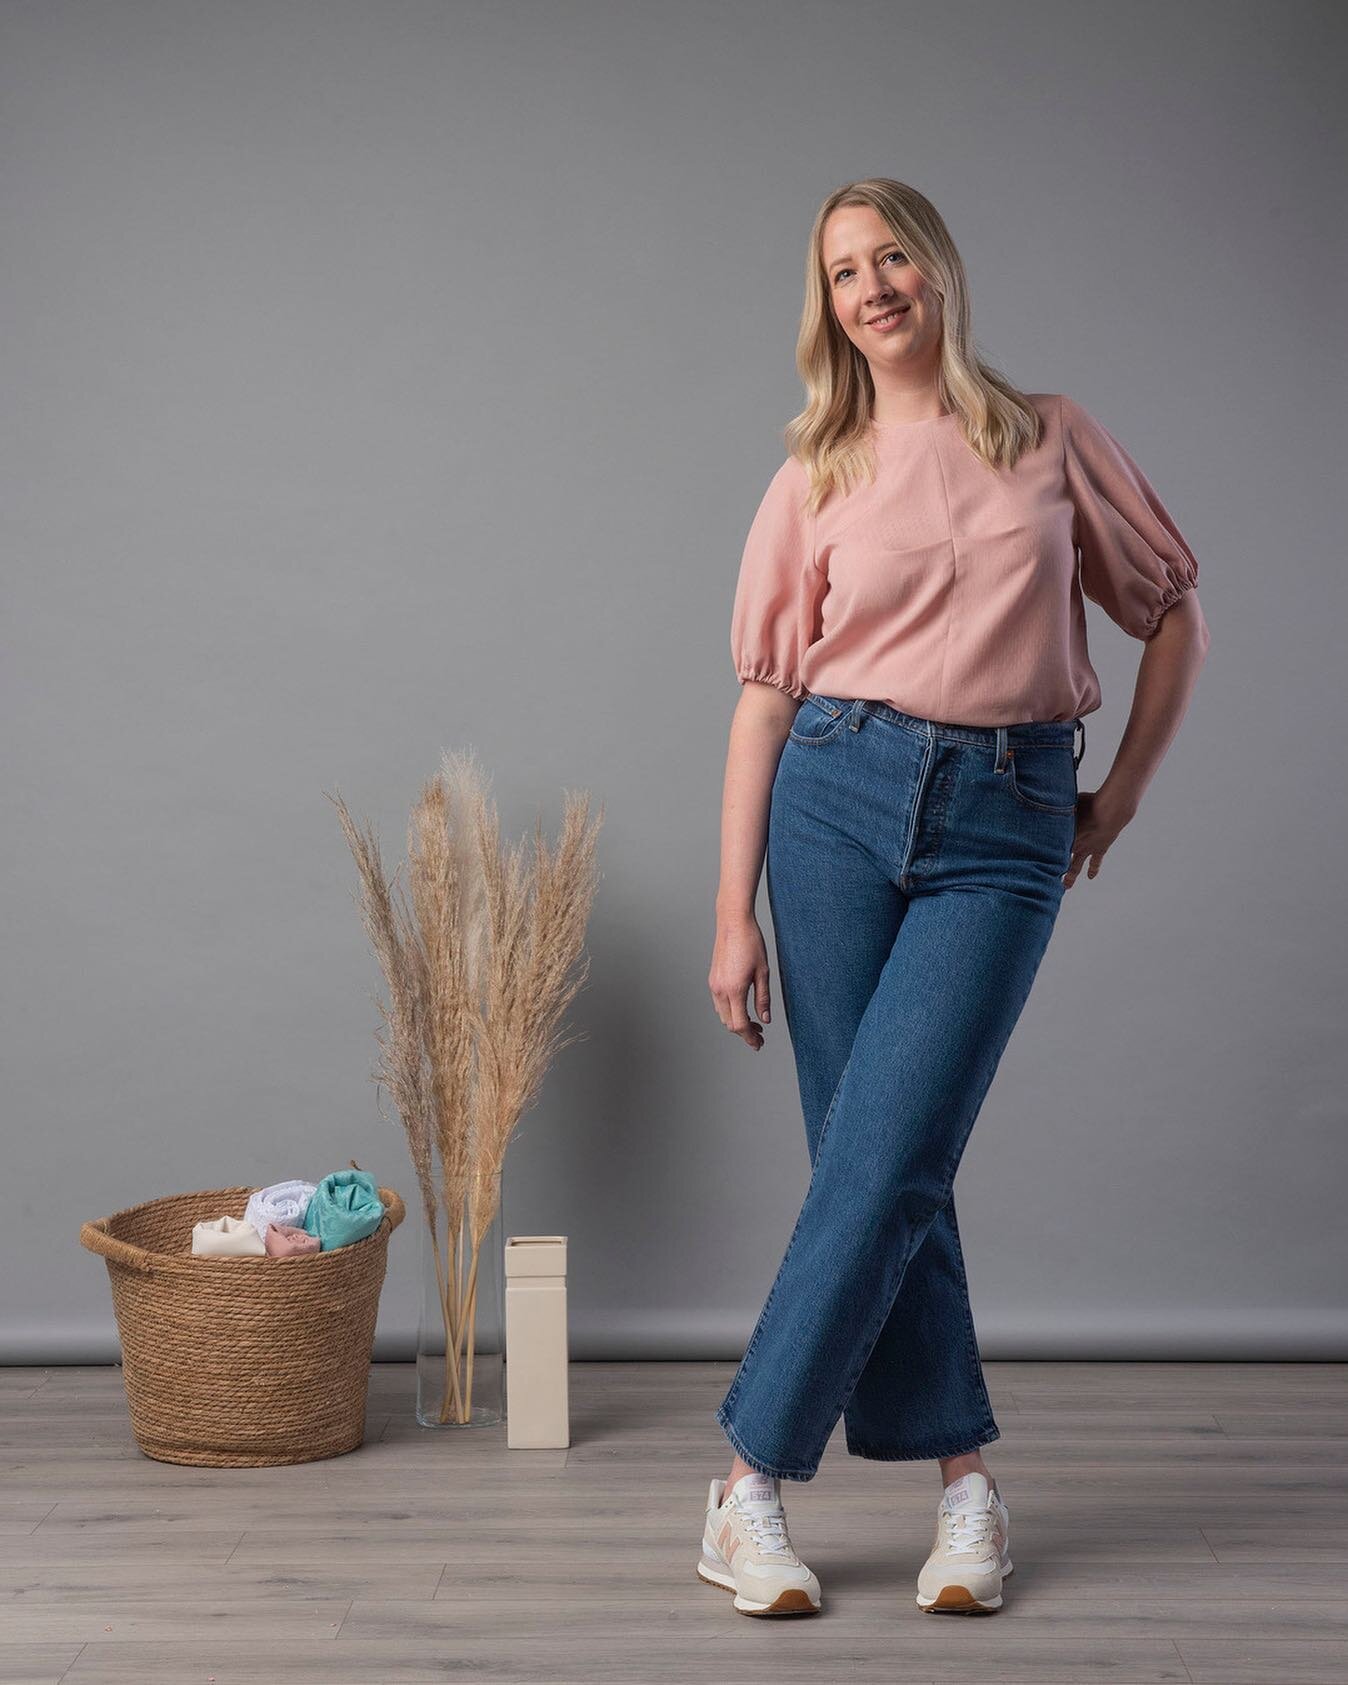 I N G R I D ✨
Our new  wardrobe staple, love an Ingrid top tucked into jeans 
⠀⠀⠀⠀⠀⠀⠀⠀⠀
Photography @kirstyandersonphoto
Make up @fionapark.mua
Model @little.rosy.cheeks
⠀⠀⠀⠀⠀⠀⠀⠀⠀
#hhIngrid #HandMadeWardrobe #ISewMyOwnClothes #IndiePatterns #PatternM